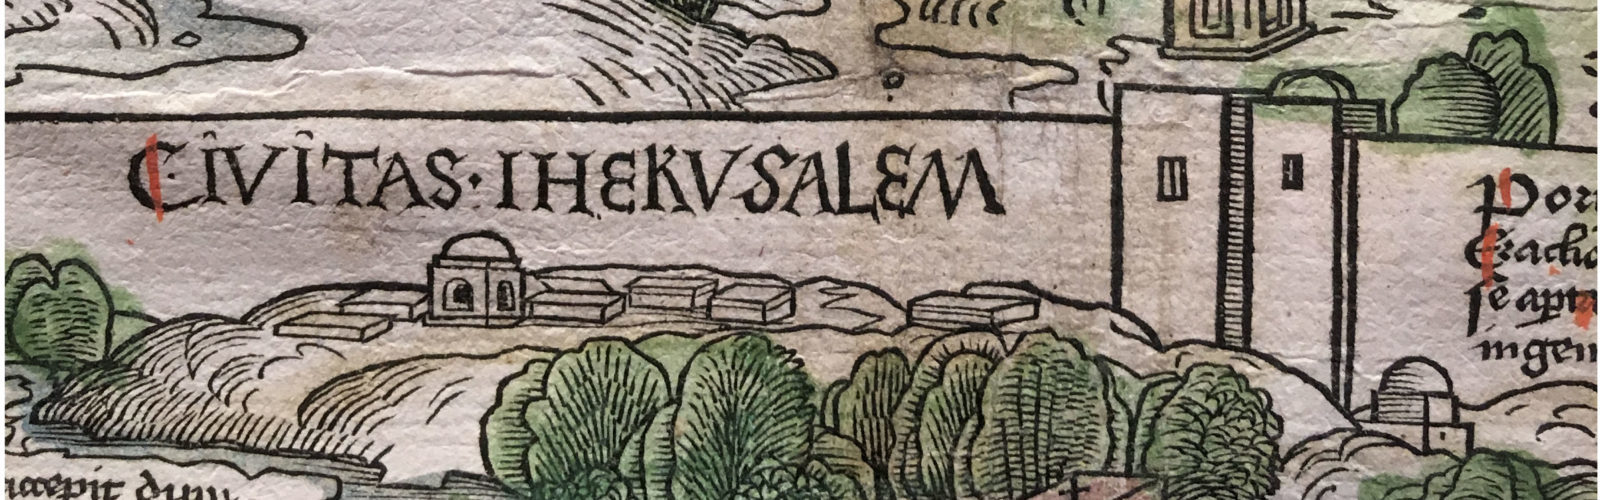 Bernhard von Breydenbach, "Peregrinatio". Oxford, Bodleian Library, S.Seld. d.9, detail from the fold-out view of the Holy Land